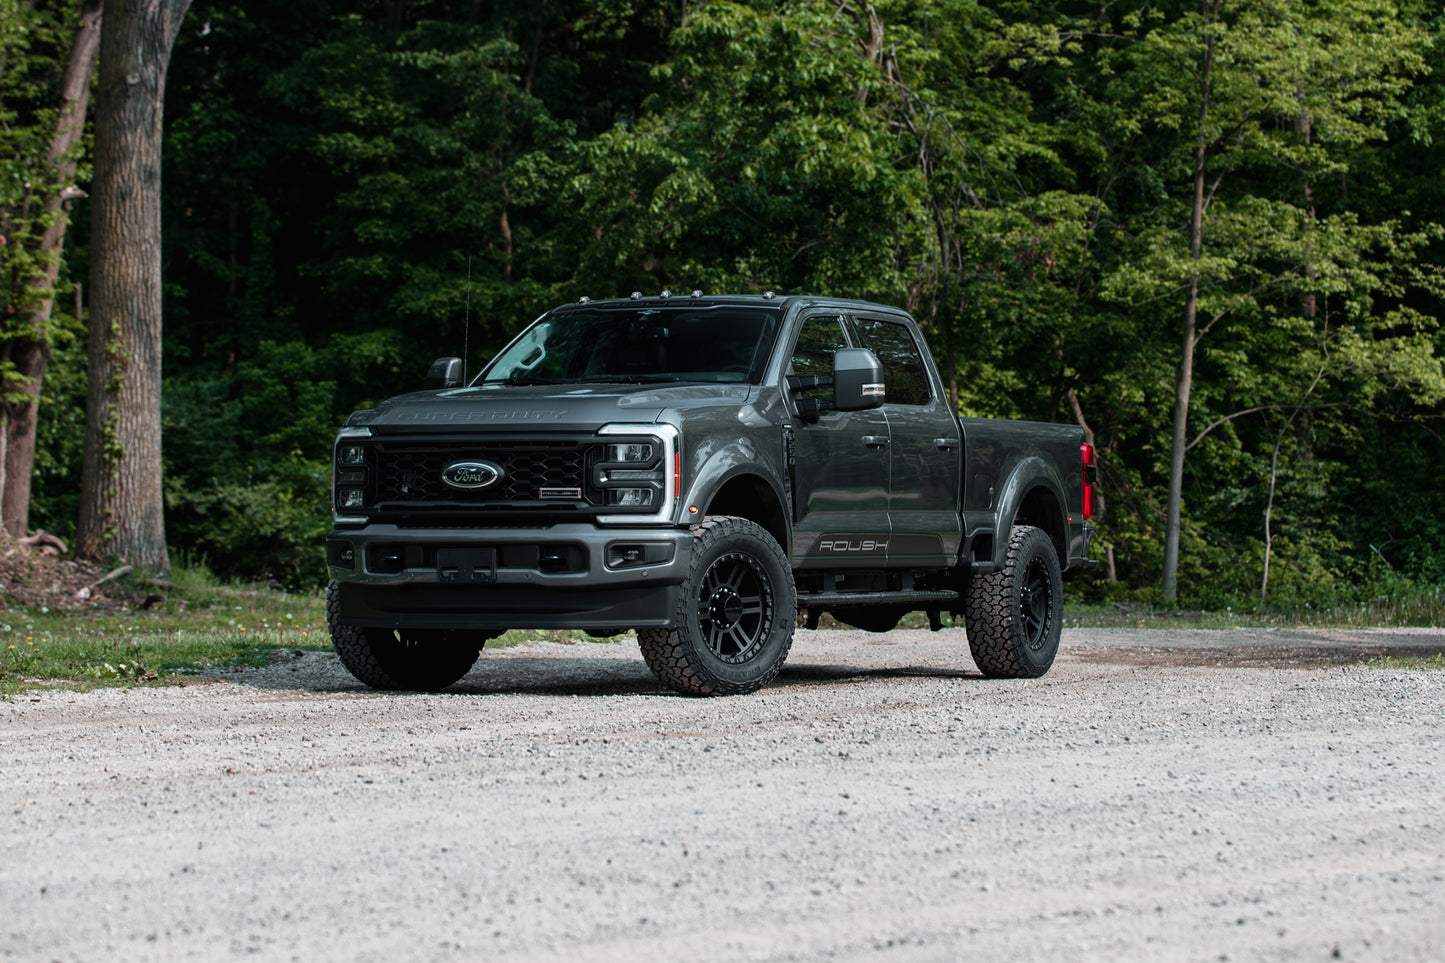 INTRODUCING THE 2023 ROUSH SUPER DUTY!